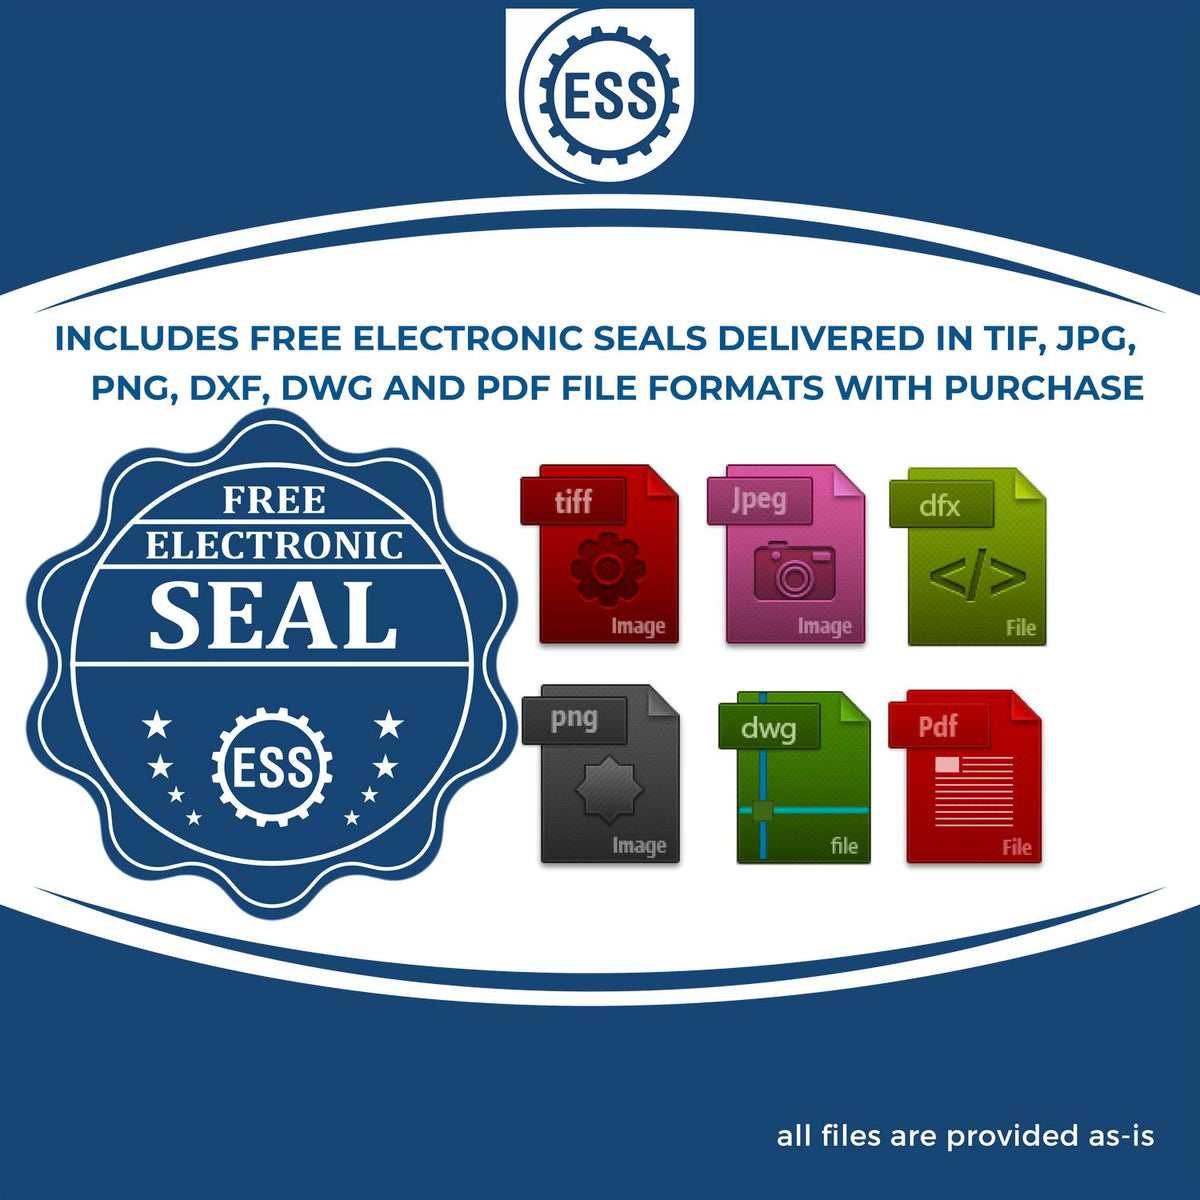 An infographic for the free electronic seal for the Soft Mississippi Professional Engineer Seal illustrating the different file type icons such as DXF, DWG, TIF, JPG and PNG.